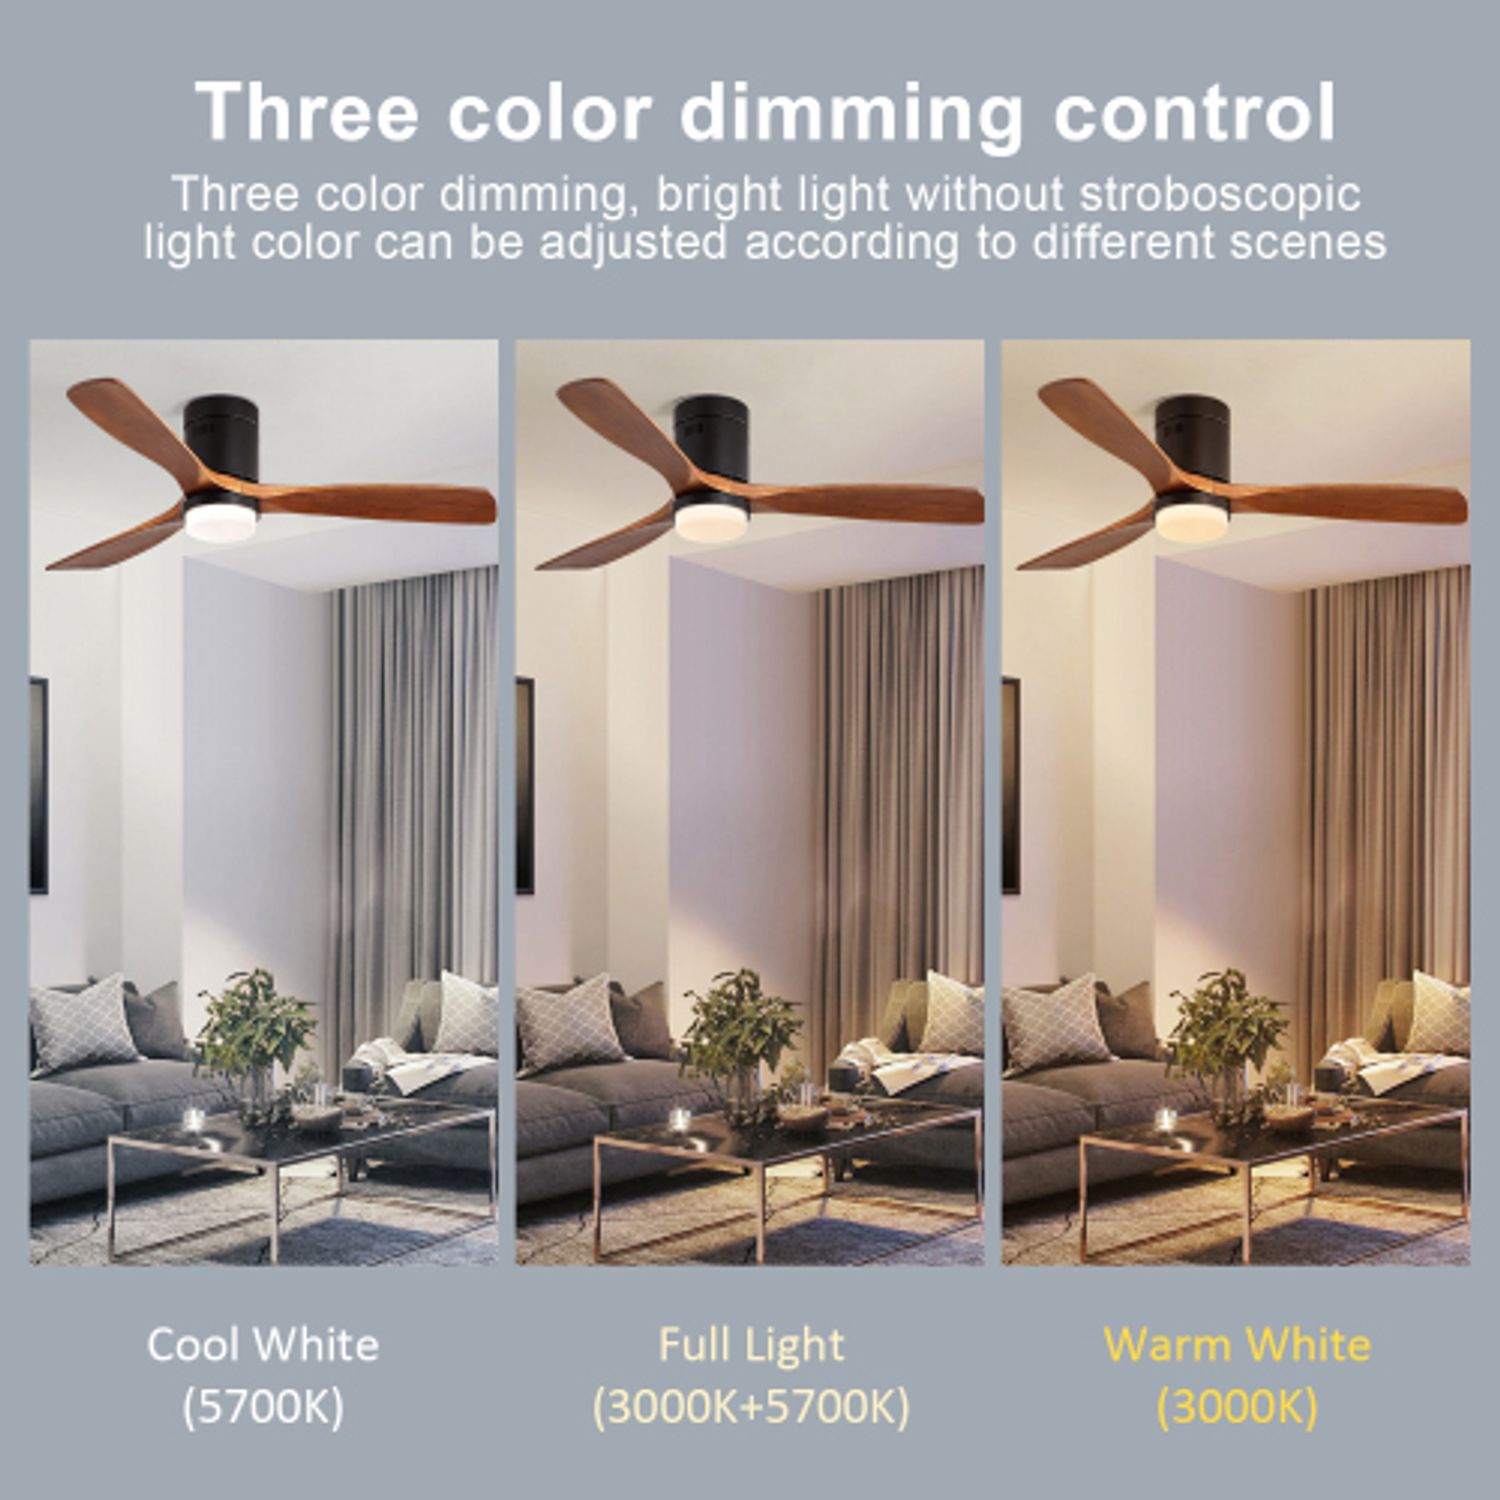 Three-color dimming remote control of Solid Wood Ceiling Fan Light Kit with Reverse